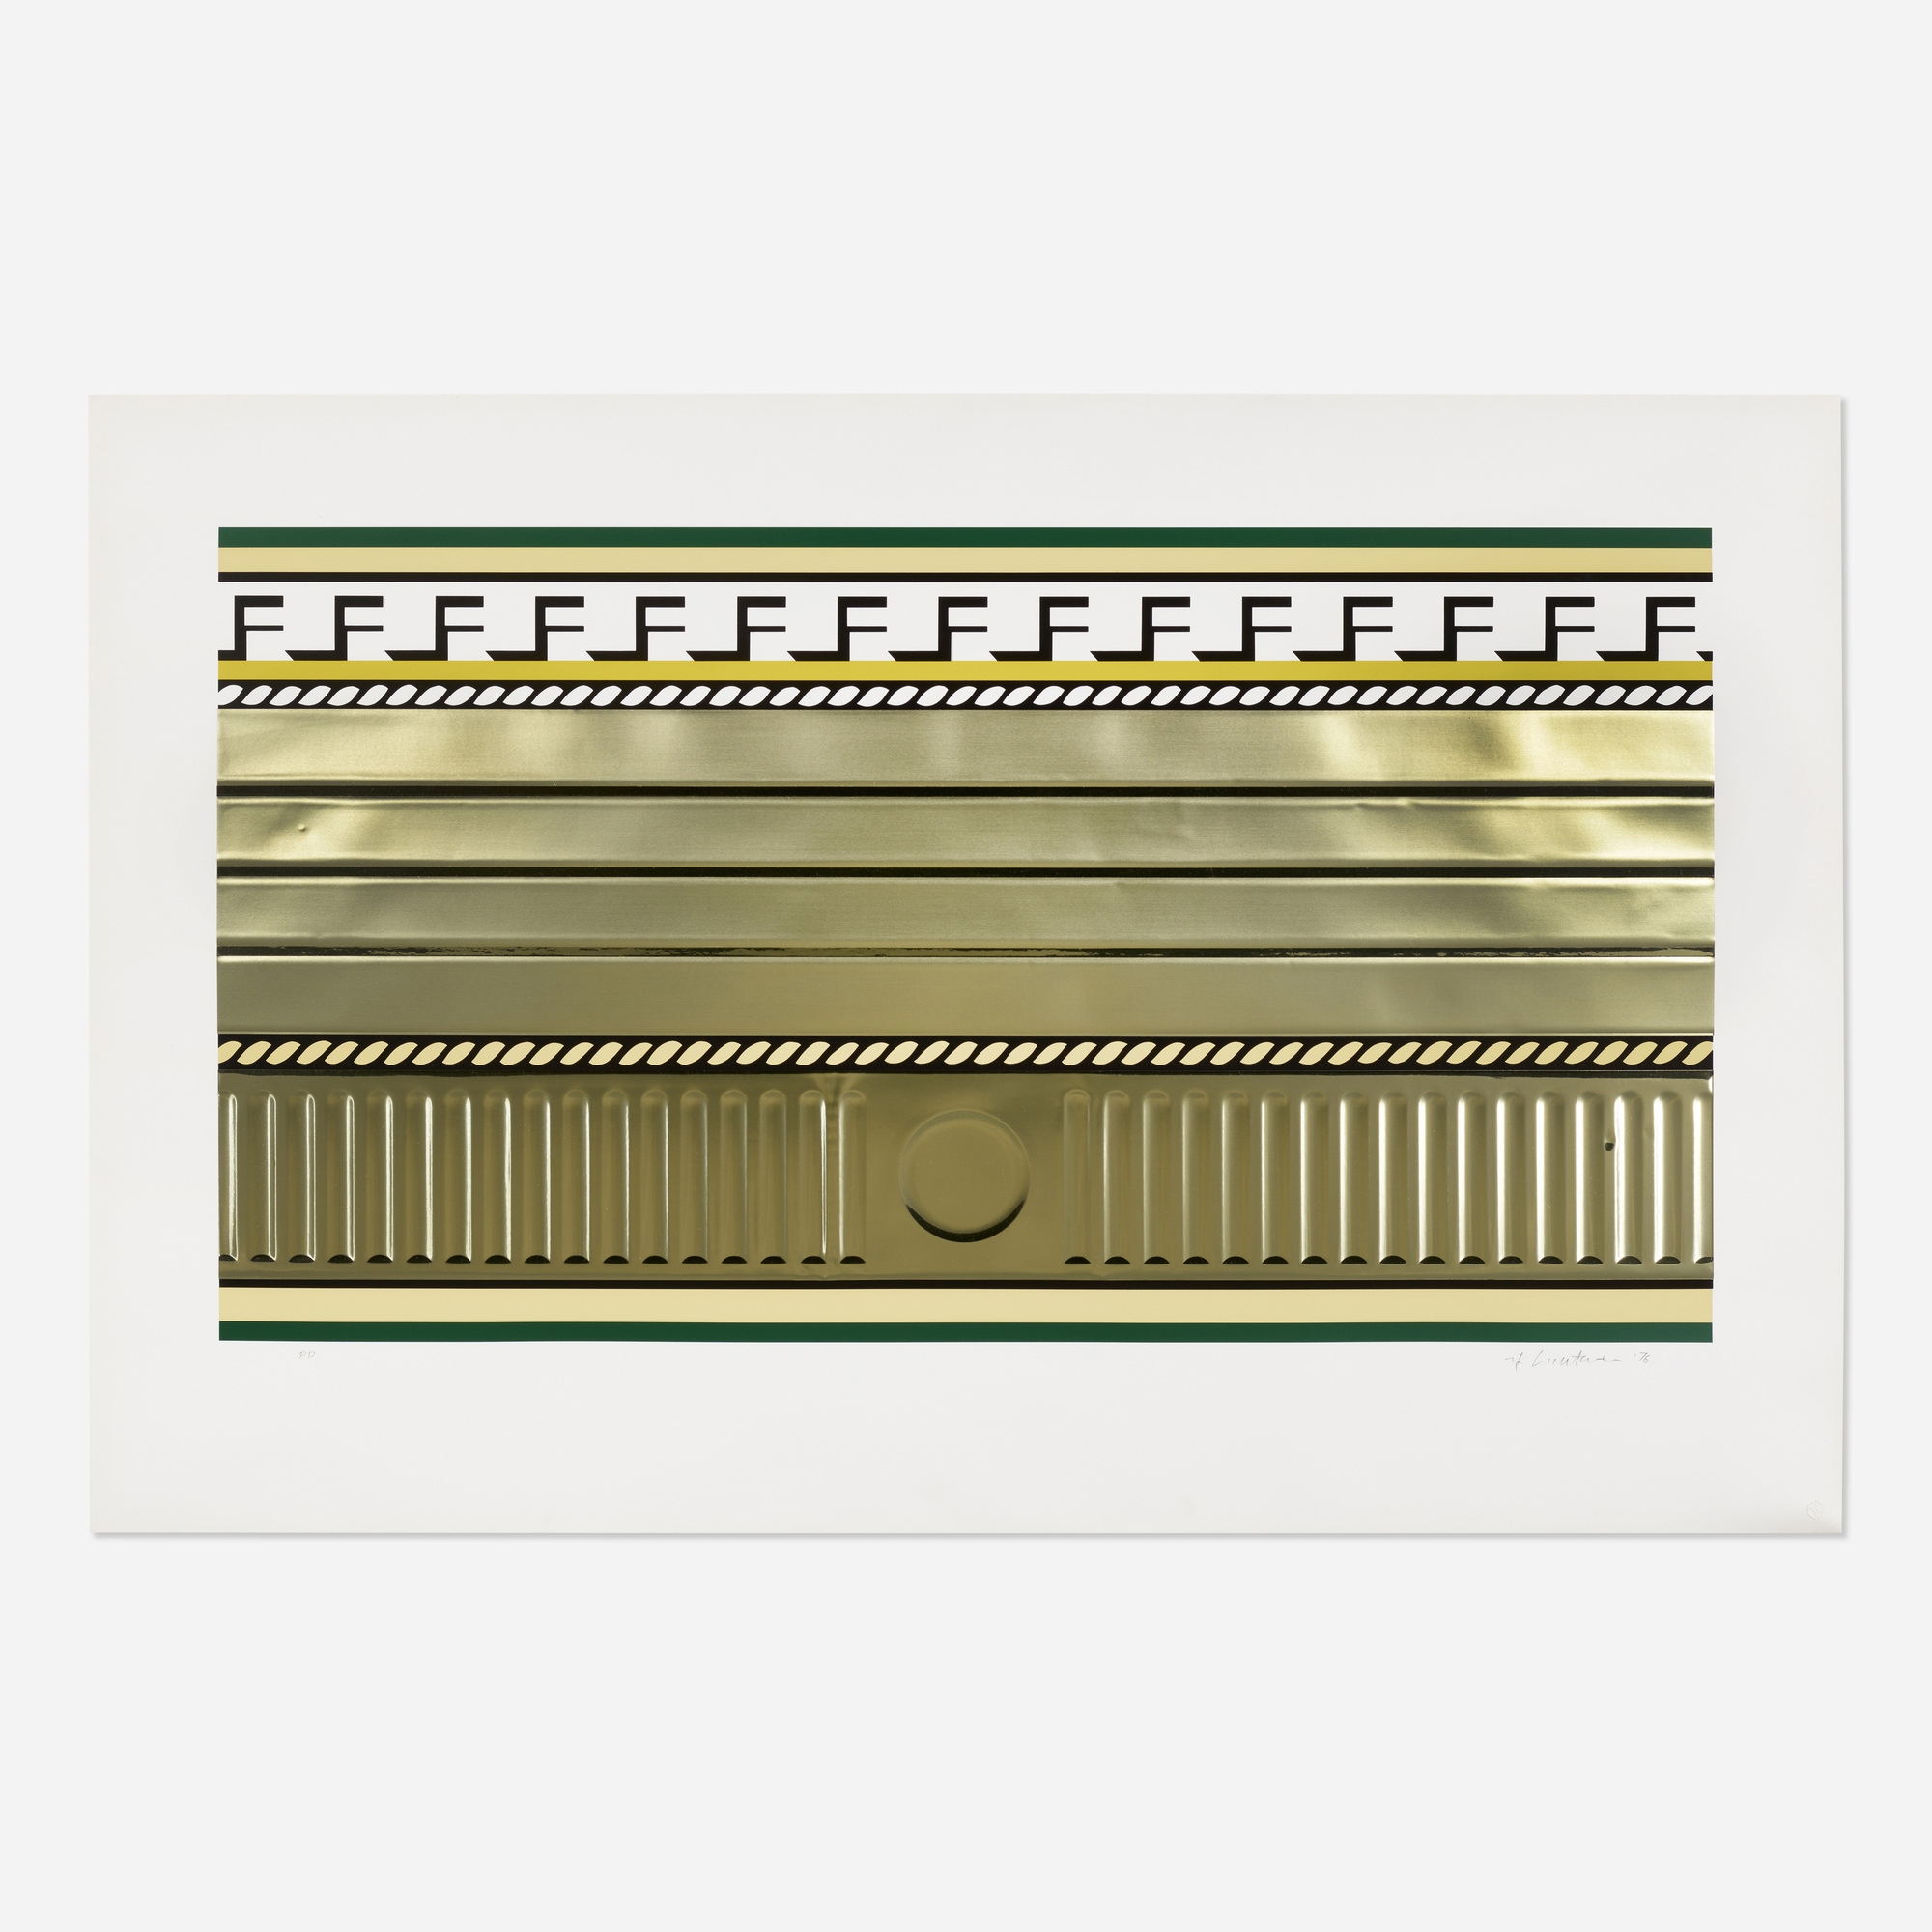 Artwork by Roy Lichtenstein, Entablature III (from the Entablature series), Made of screenprint, lithograph and collage in colors with embossing on BFK Rives